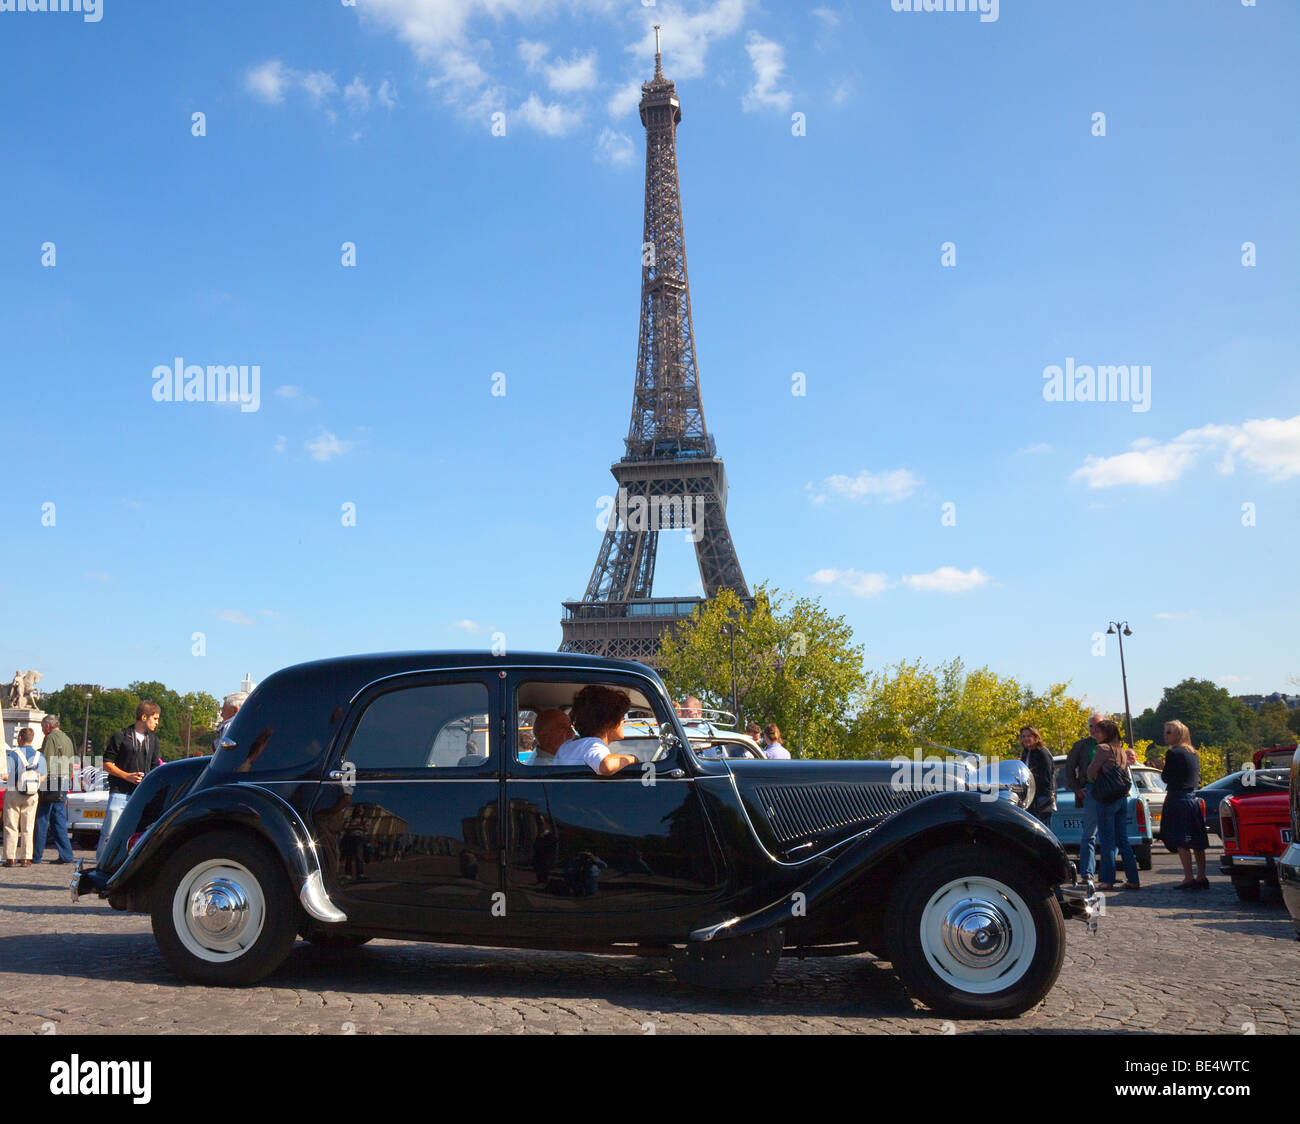 Light-15 Citroen as driven by 'Maigret' the French Detective, at the Eiffel Tower in Paris France Stock Photo